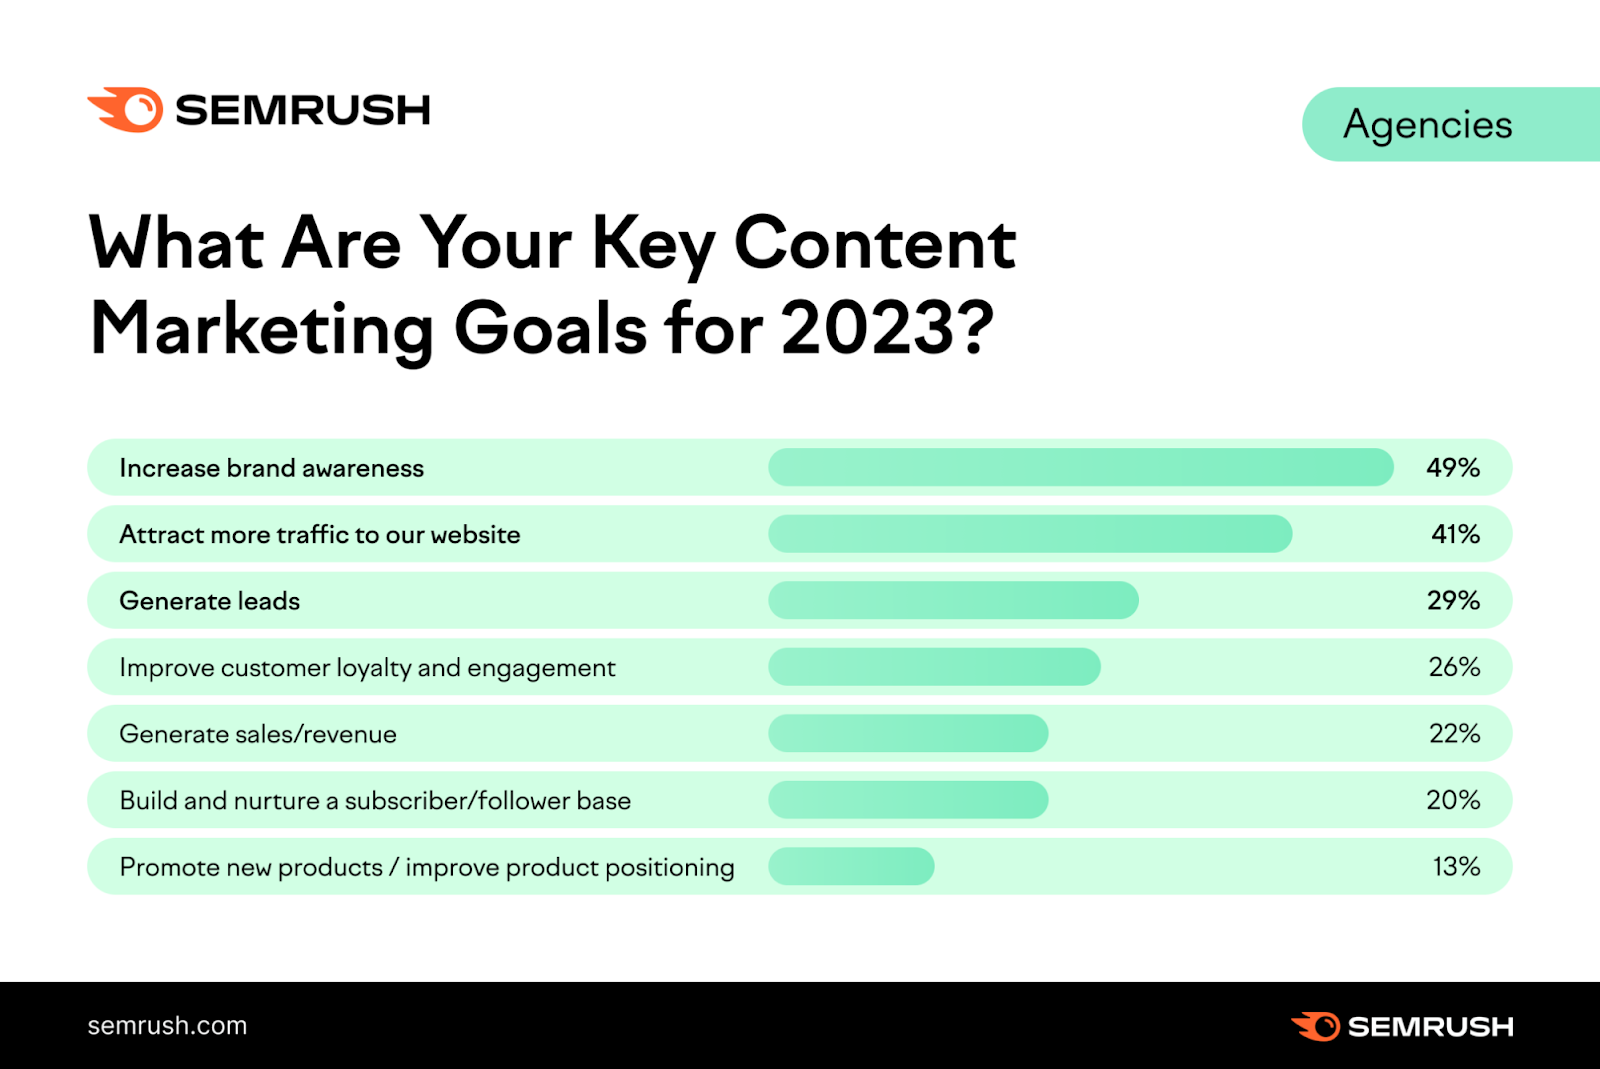 A graph showing marketers's key content goals for 2023, with increasing brand awareness being the primary goal